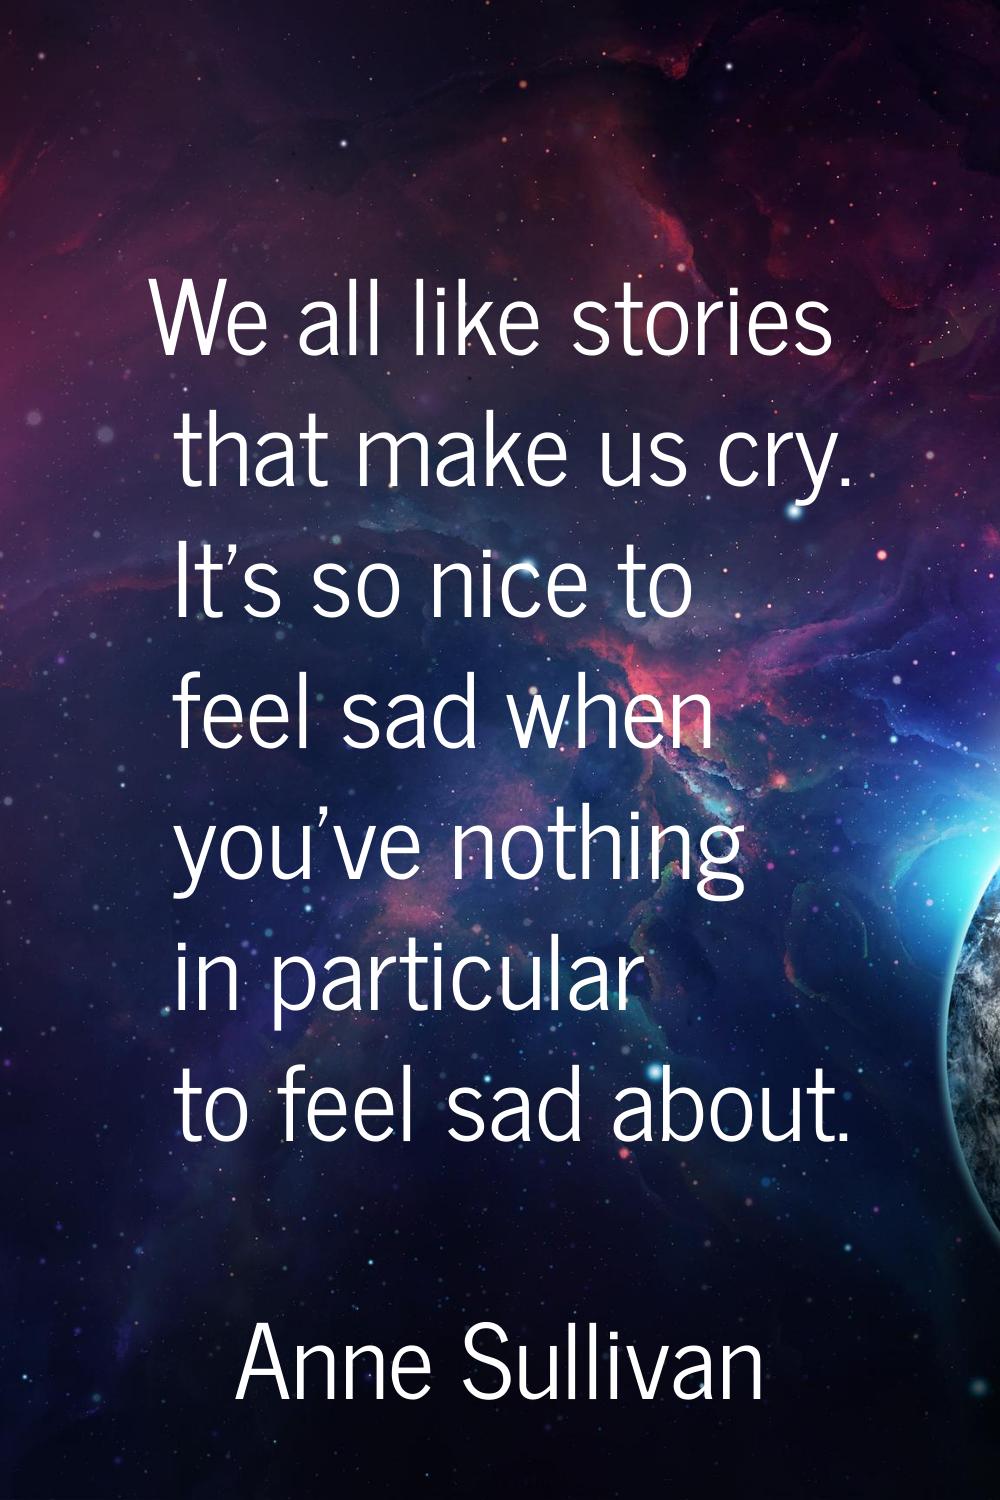 We all like stories that make us cry. It's so nice to feel sad when you've nothing in particular to